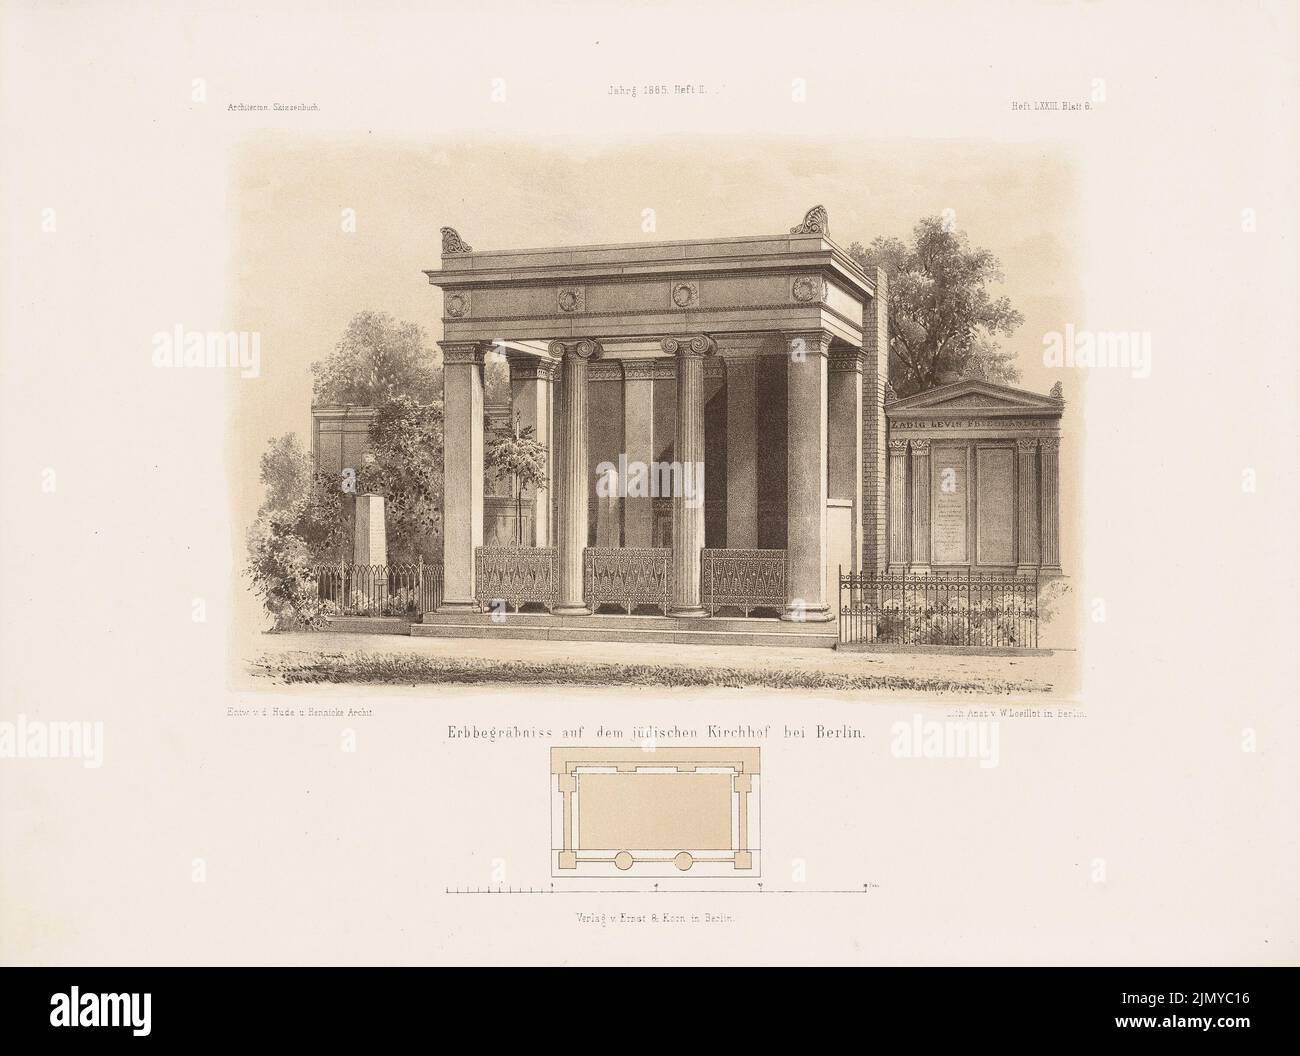 Hude & Hennicke, inheritance in the Jewish cemetery, Berlin. (From: Architectural sketchbook, H. 73/2, 1865.) (1865-1865): floor plan, perspective view. Lithography colored on paper, 24.8 x 33.3 cm (including scan edges) Stock Photo